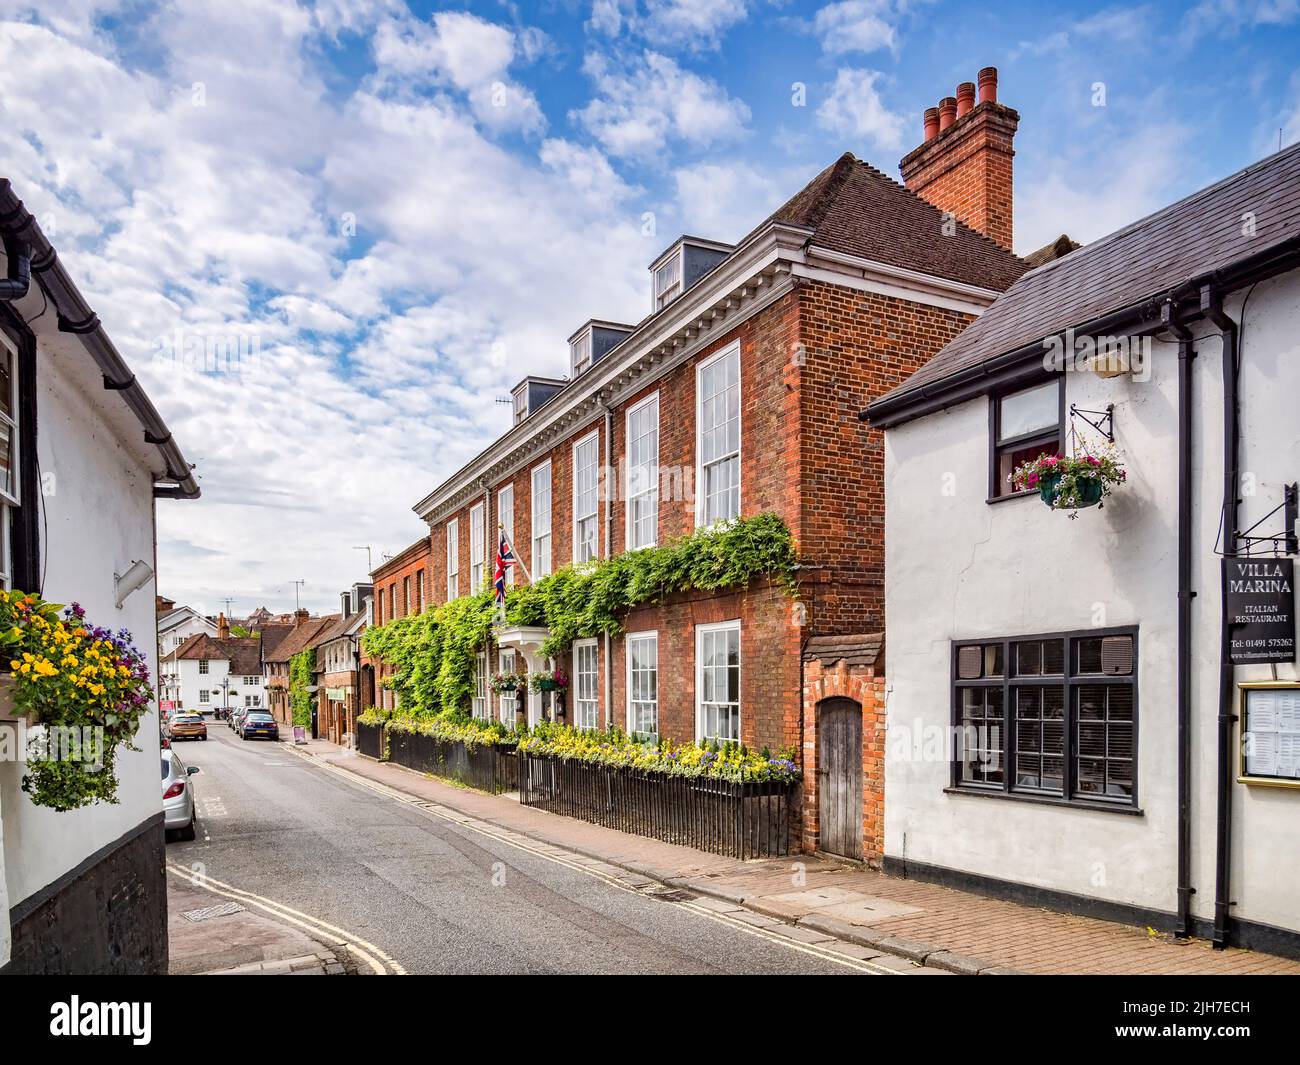 4 June 2019: Henley-on-Thames, Oxfordshire - Beautiful classic buildings in Thameside, Henley-on-Thames. Stock Photo